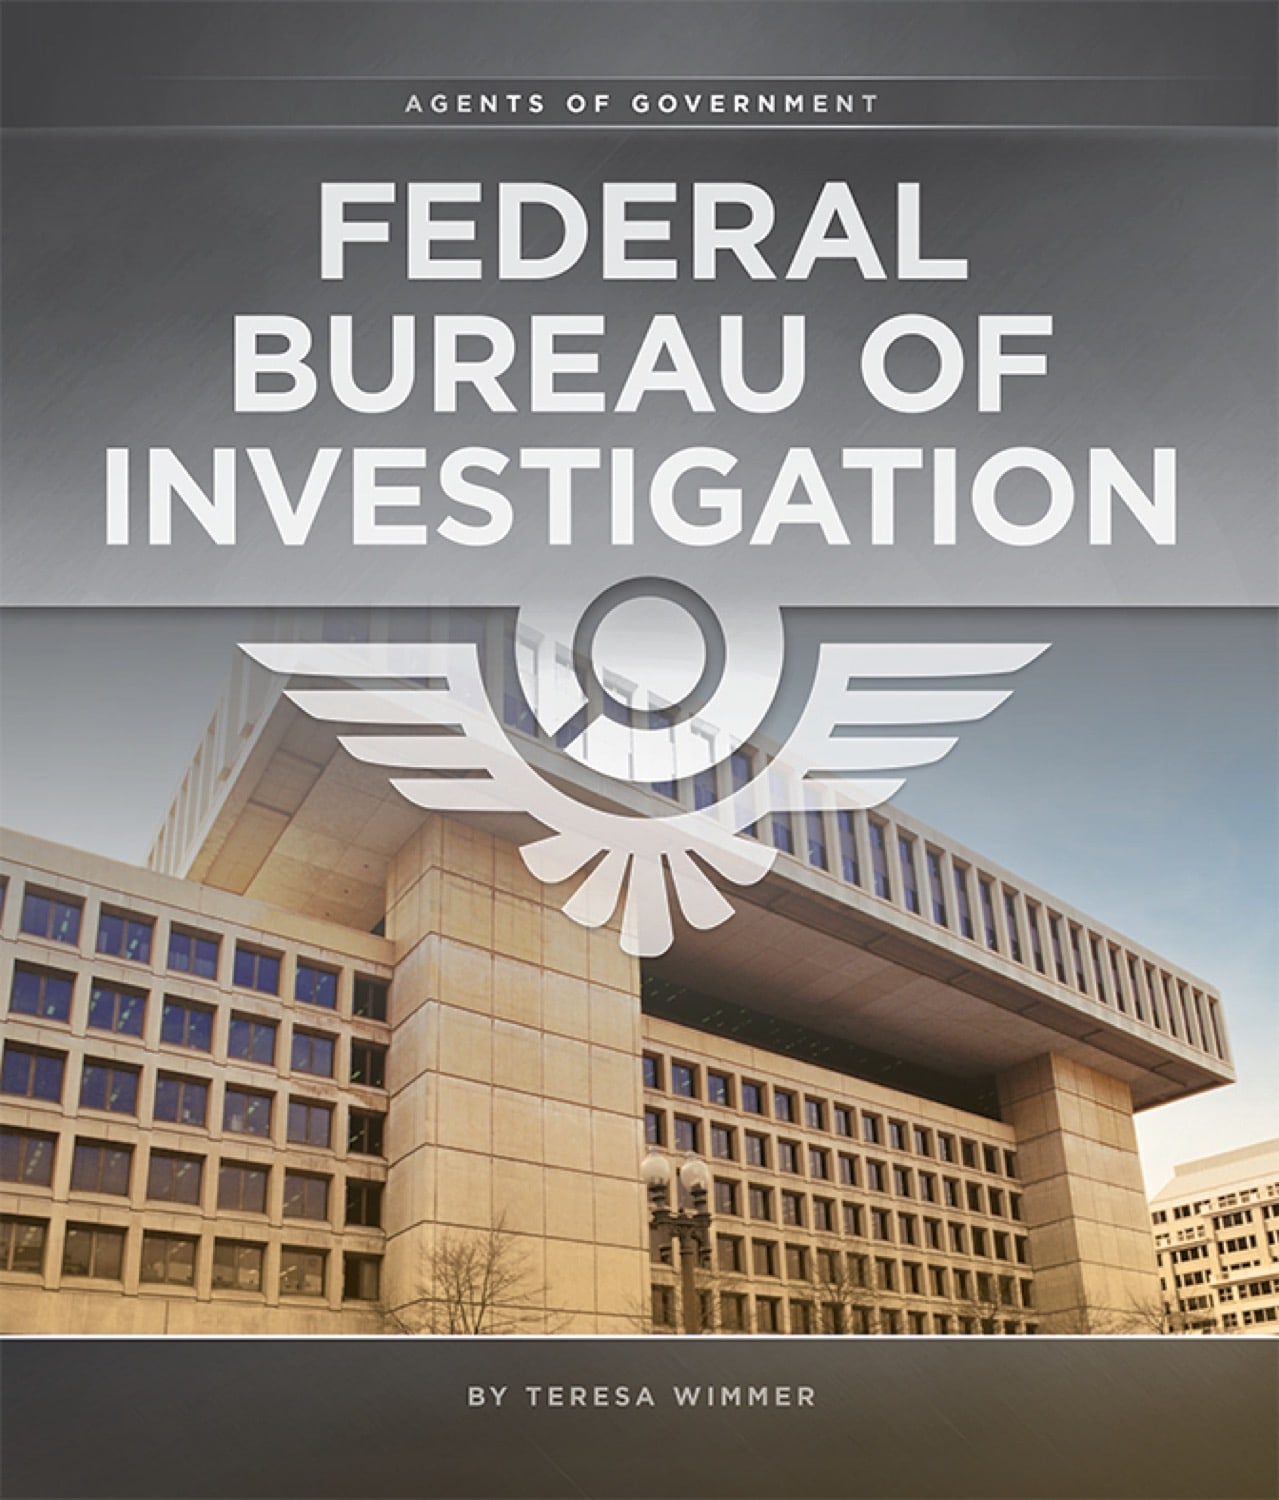 Agents of Government: Federal Bureau of Investigation by The Creative Company Shop